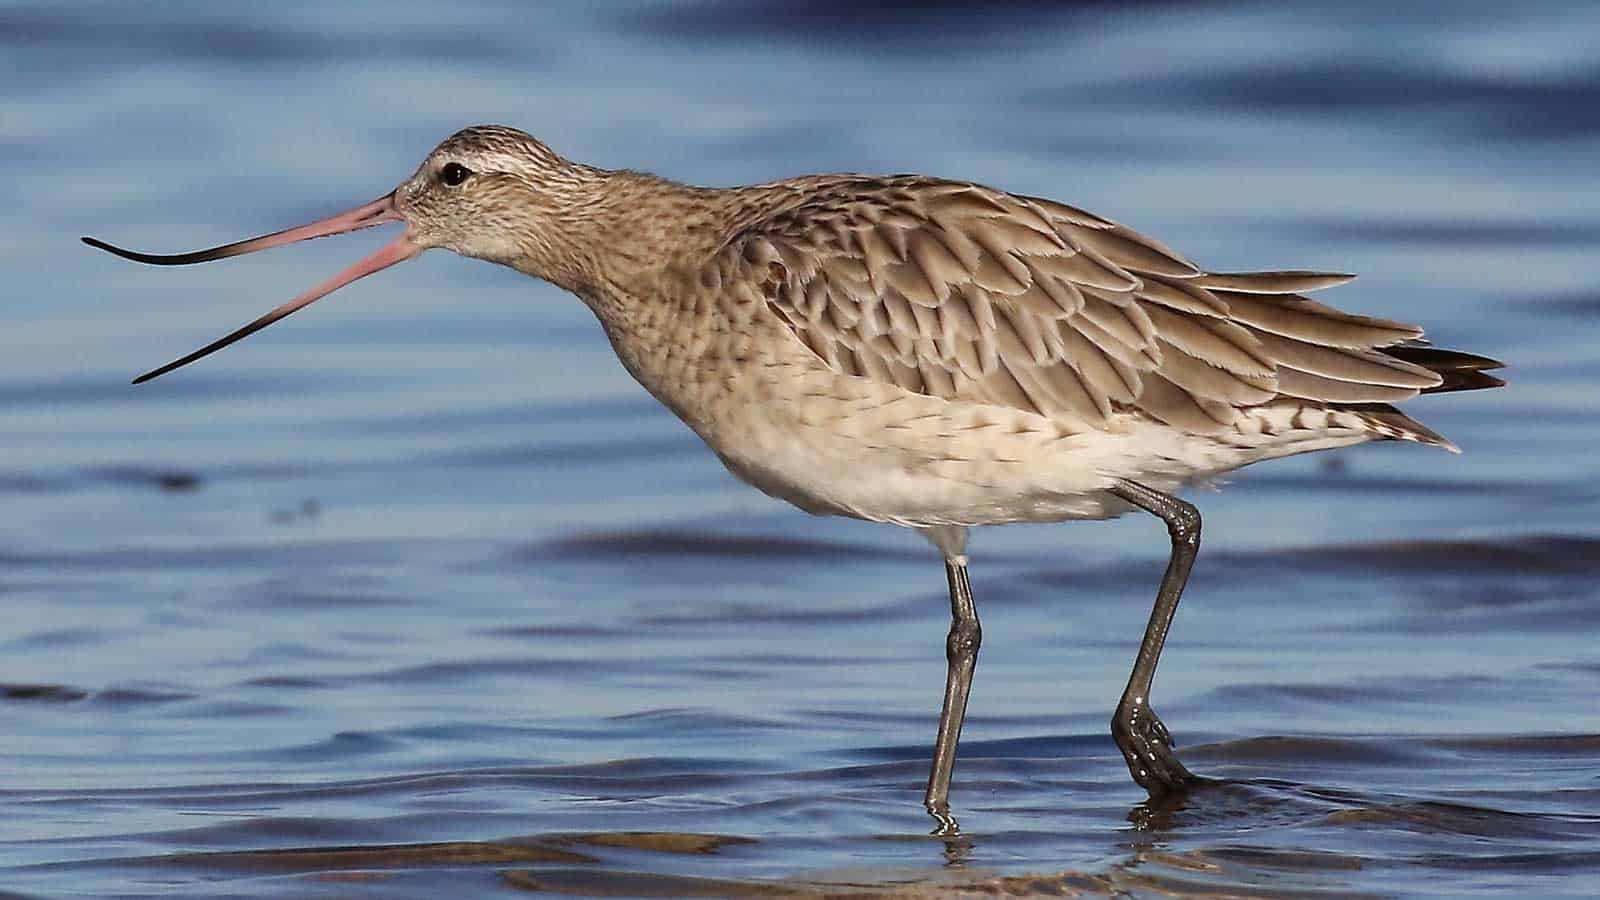 Bar-tailed godwit standing in shallow water with its bill open.